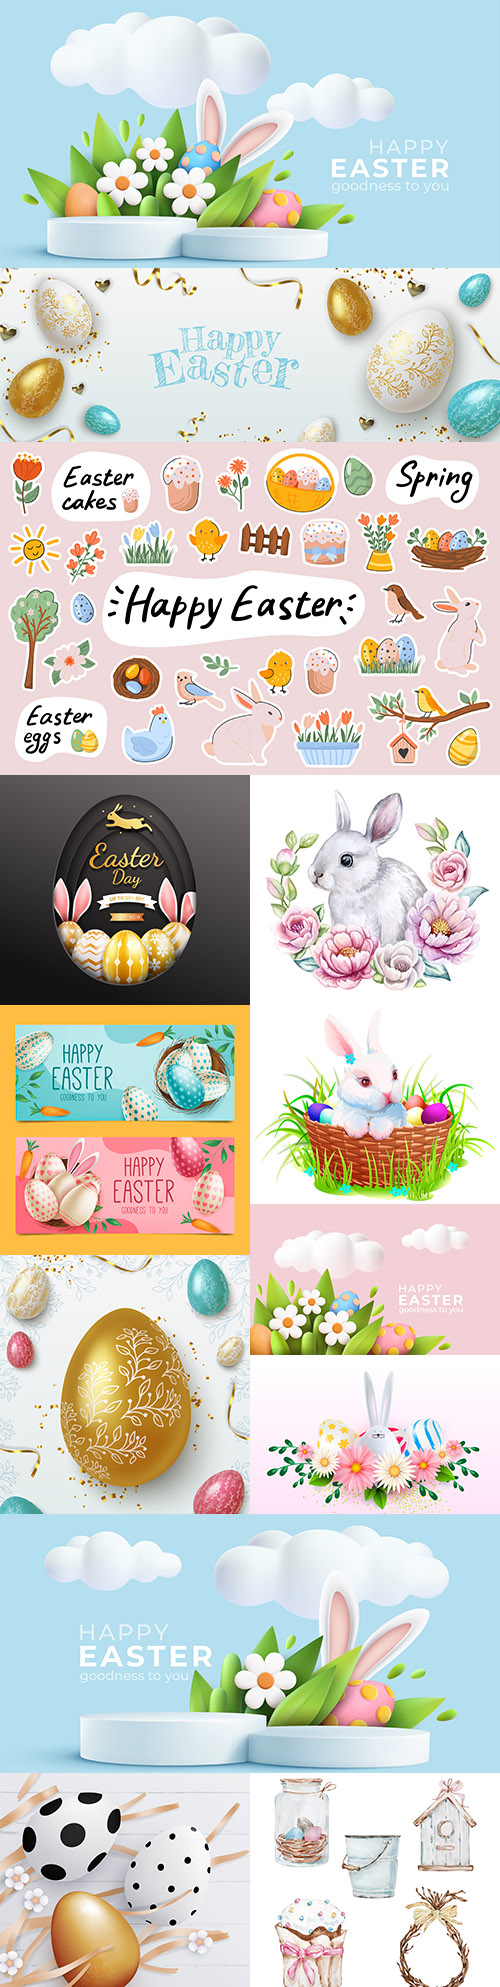 Happy Easter background and design banner with colorful eggs 6